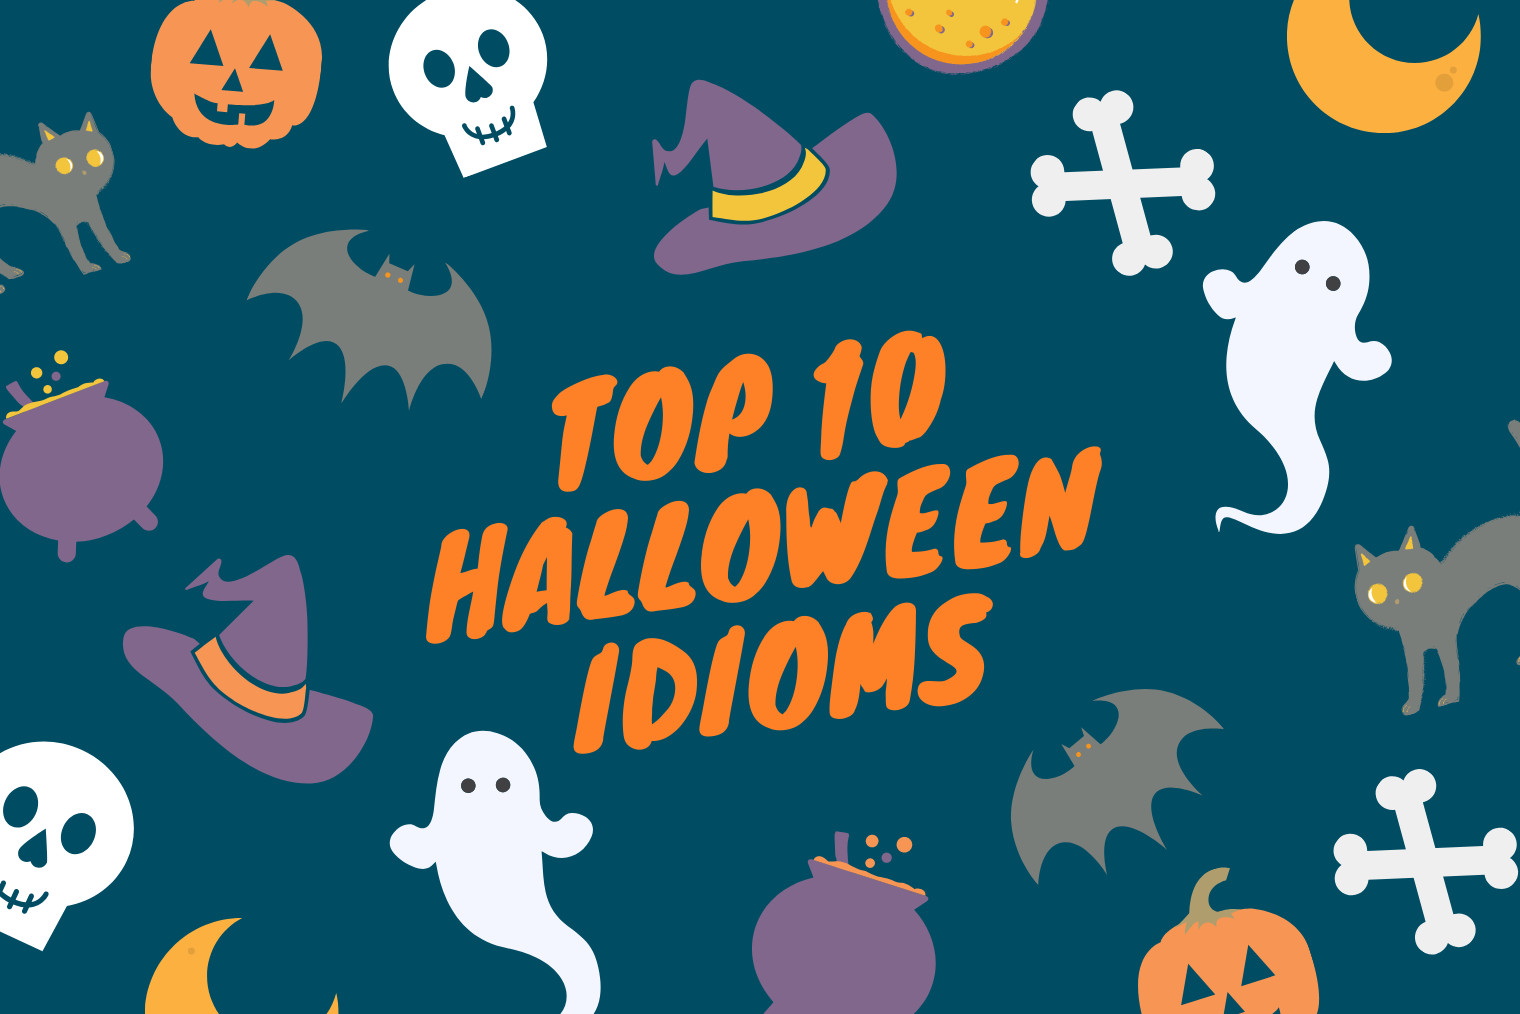 Top 10 Halloween idioms and expressions | Garnet Education